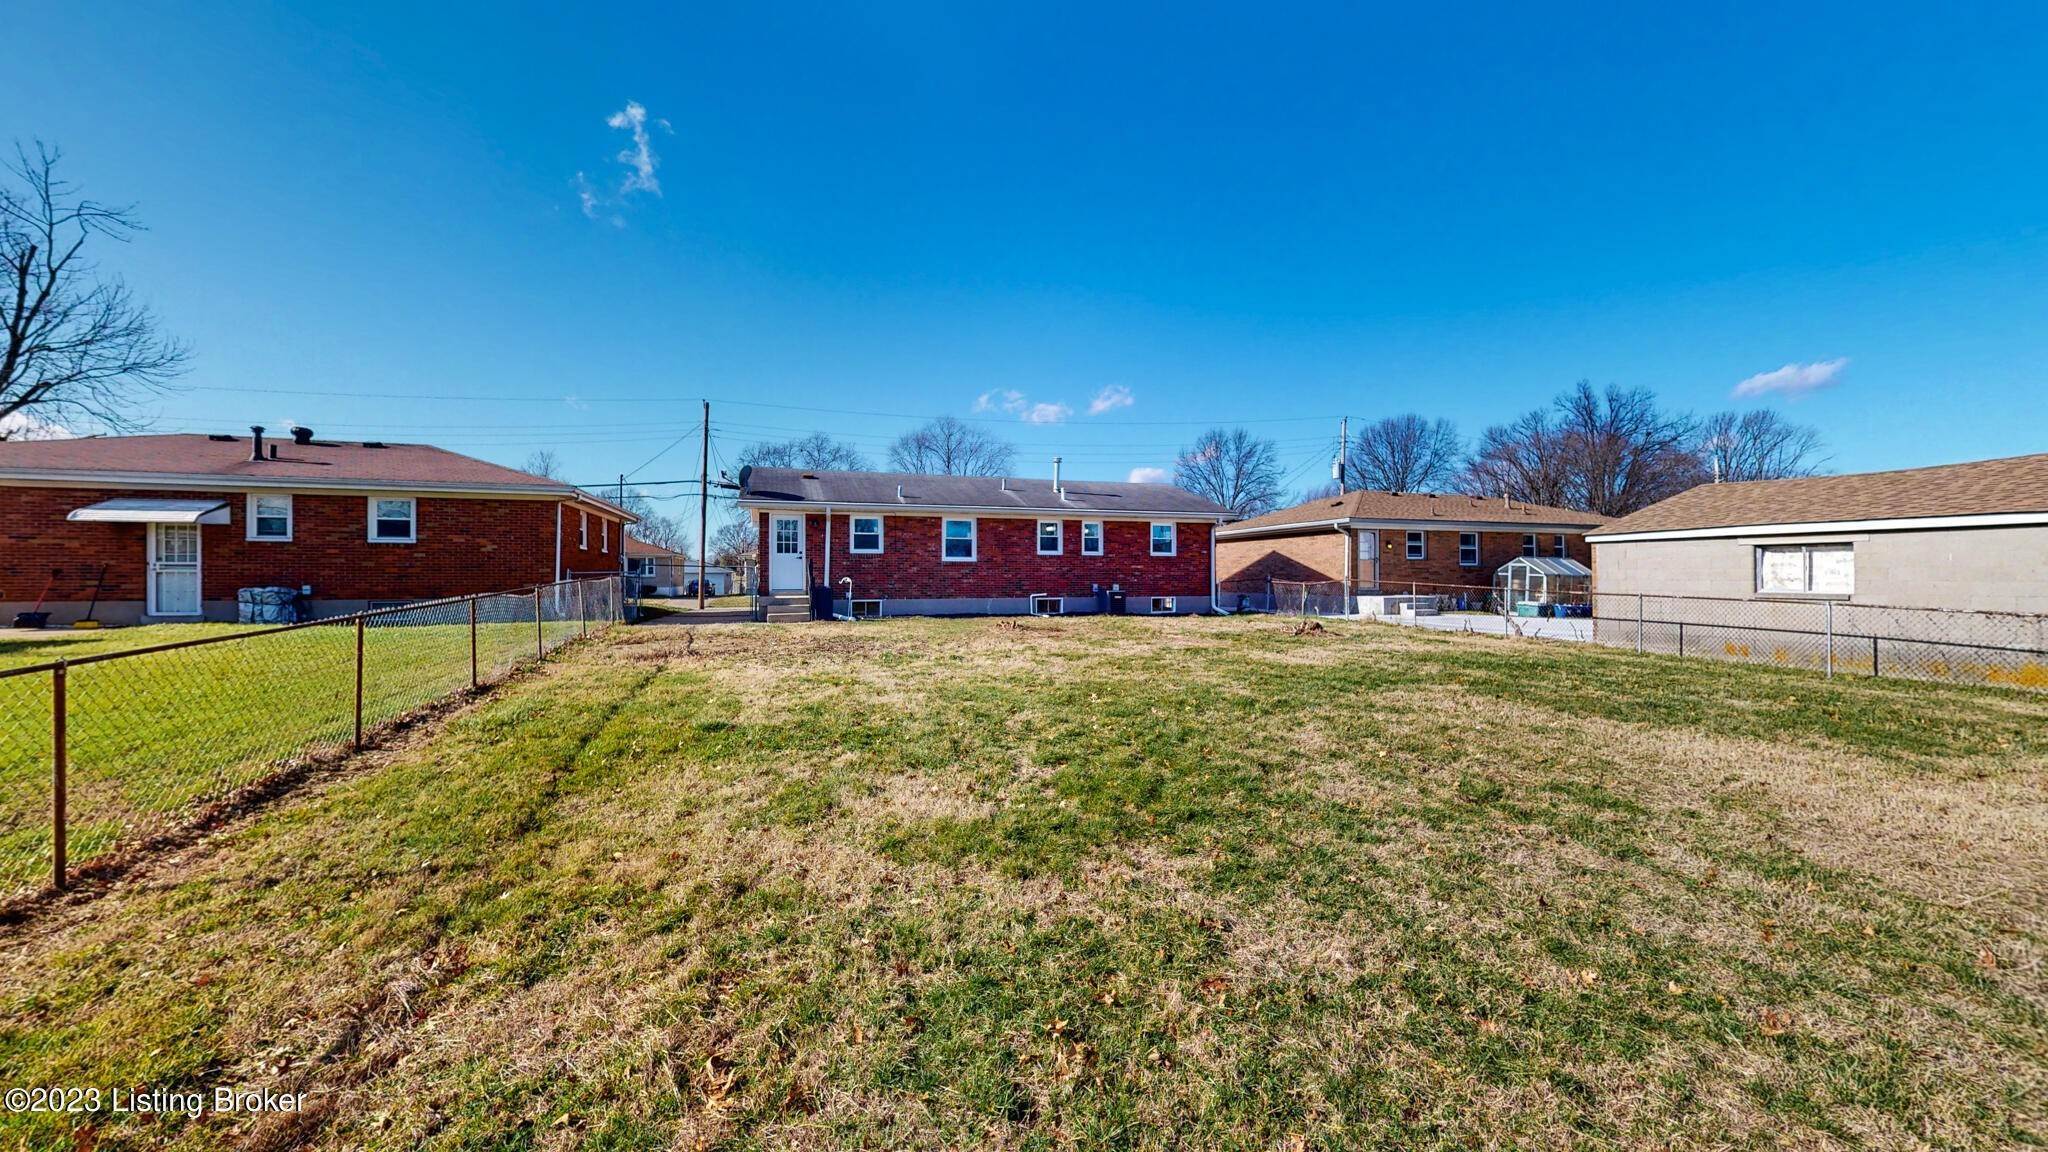 38. Single Family at Louisville, KY 40216